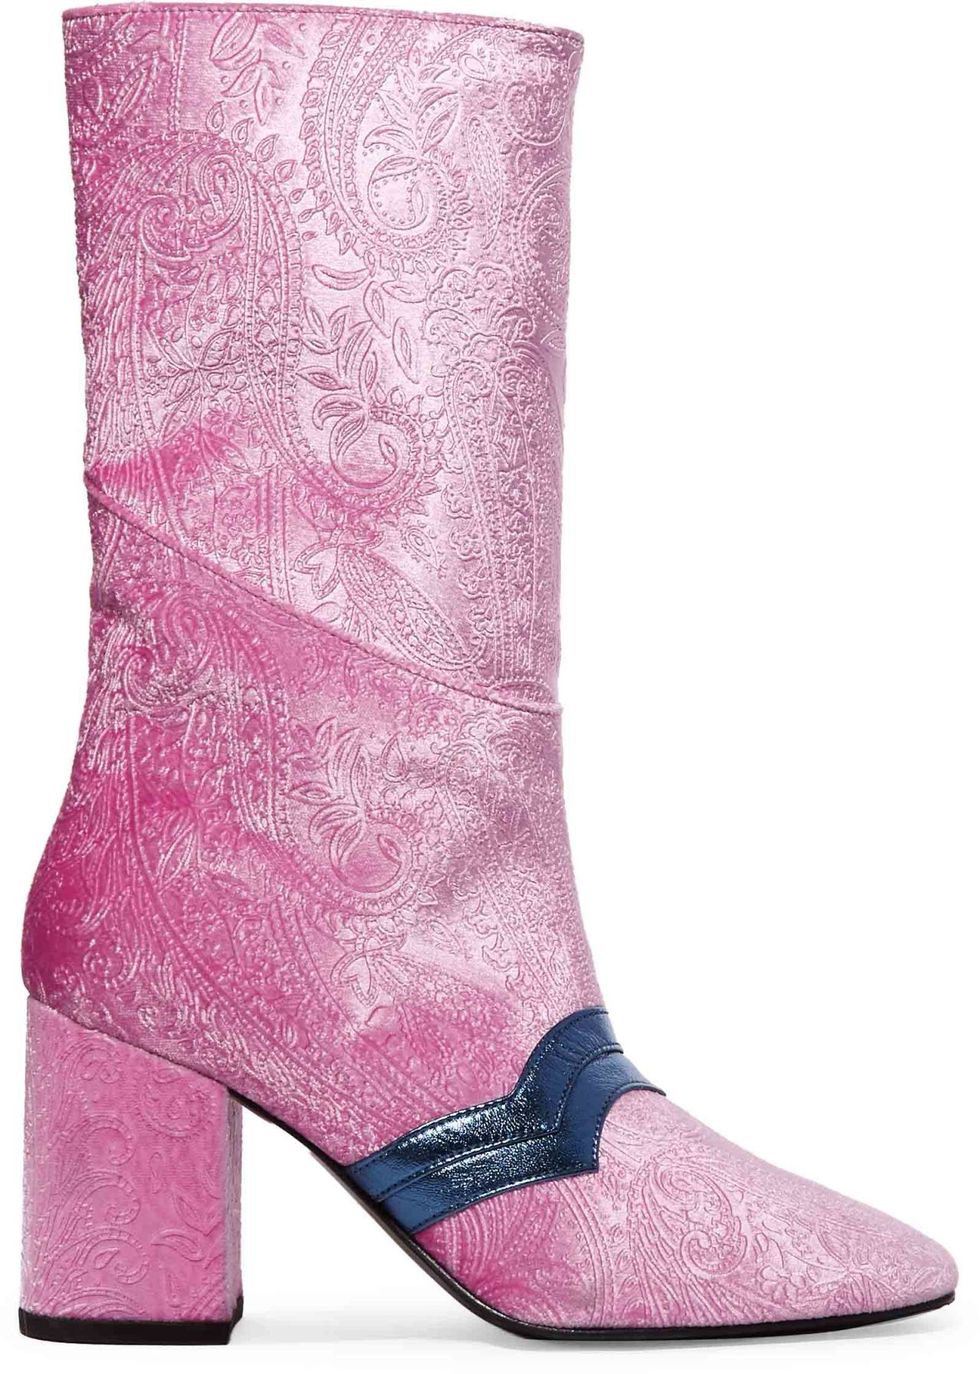 Boot, Purple, Pink, Magenta, Violet, Fashion, Sock, Costume accessory, Knee-high boot, 